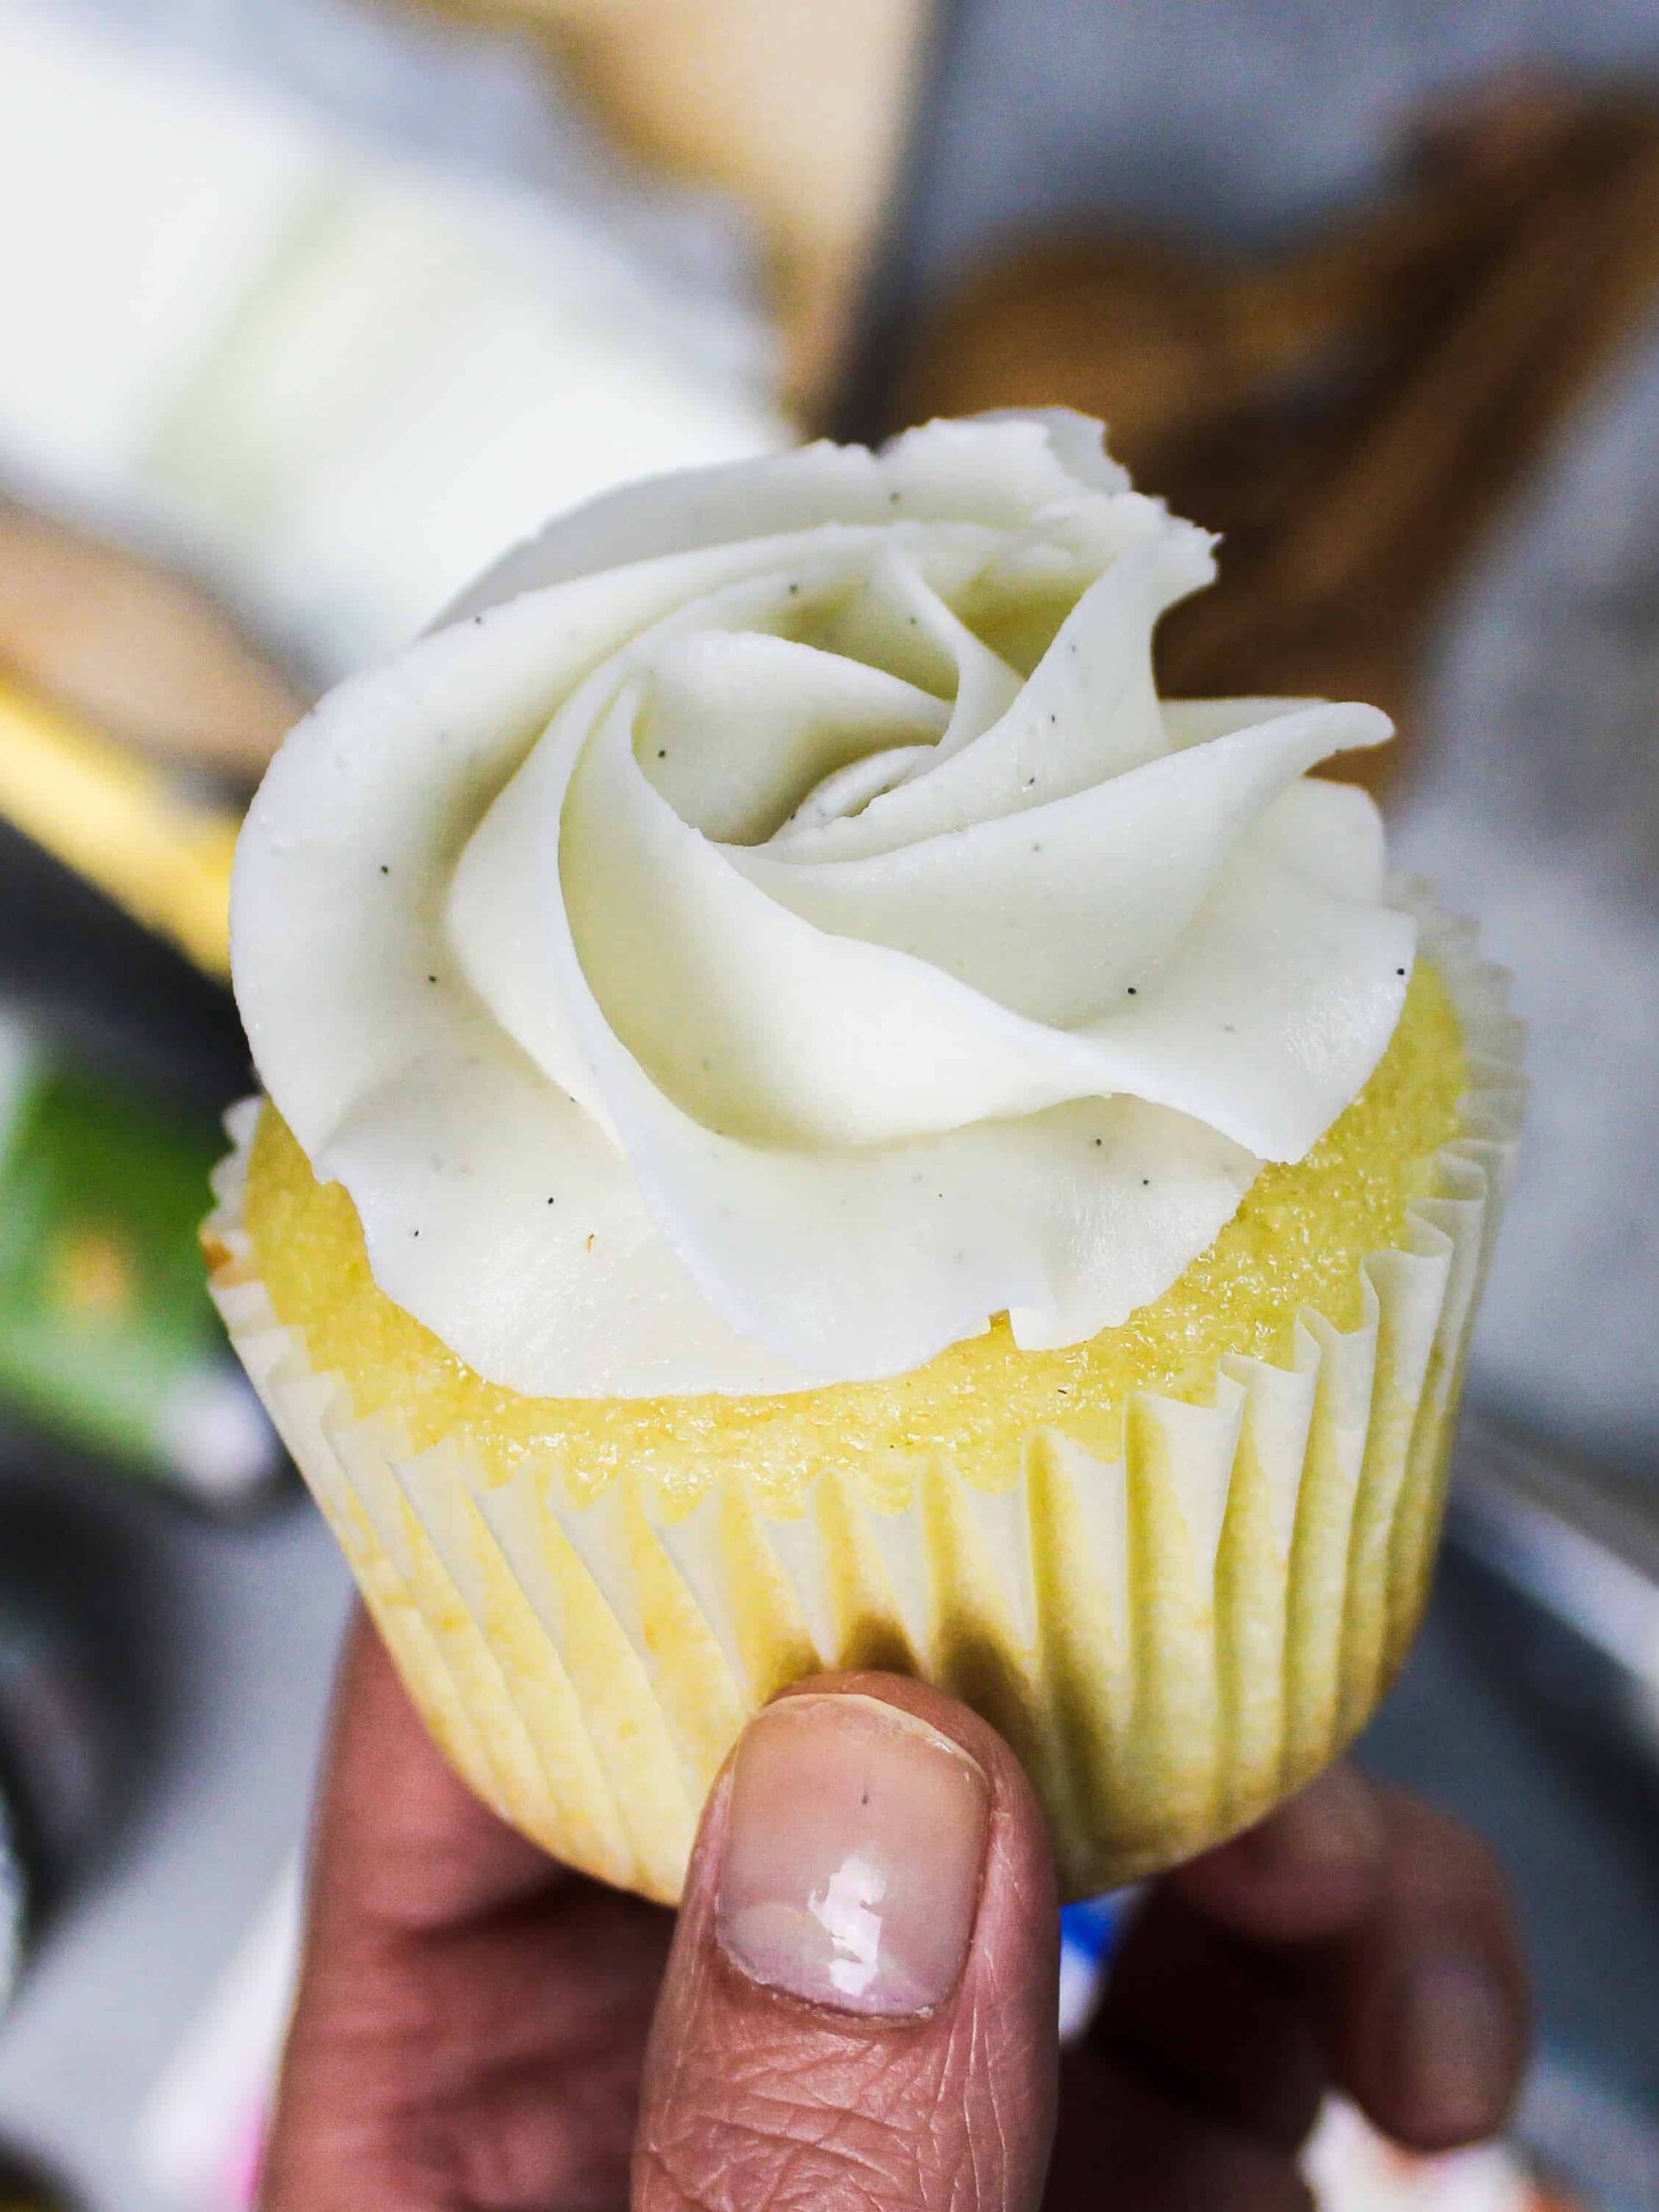 image of vegan buttercream frosting piped onto a cupcake